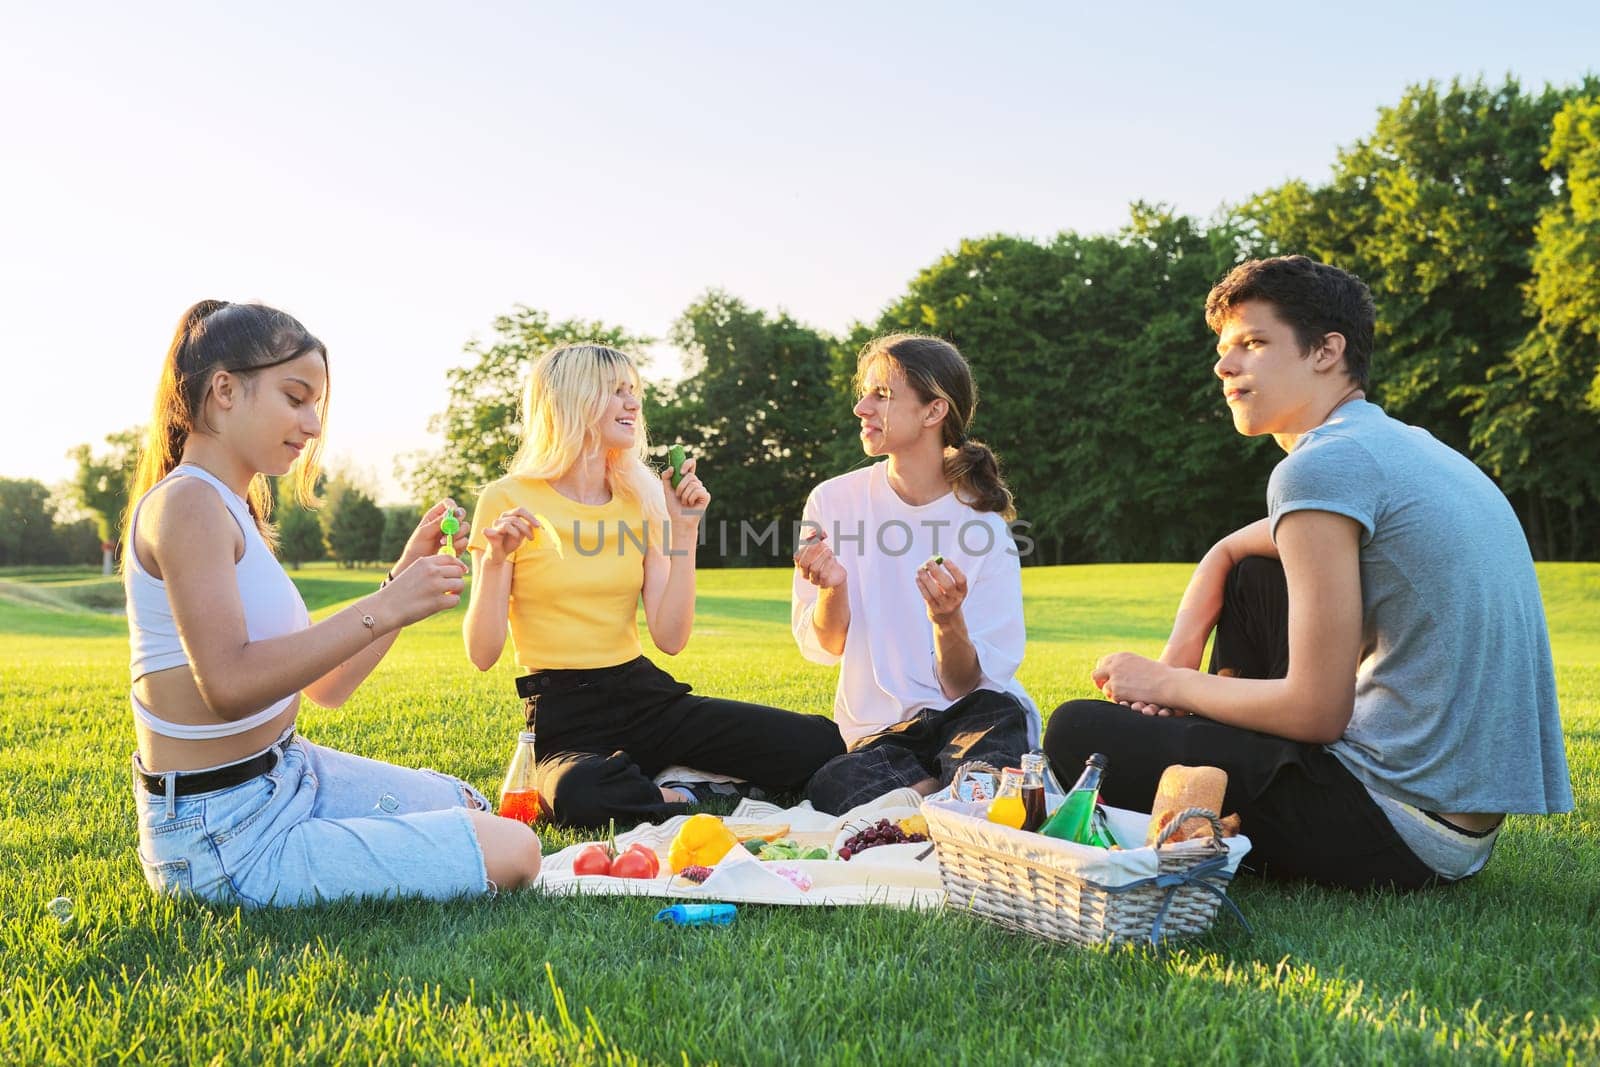 Teens having fun on picnic in park on lawn. Group of teenagers friends resting eating talking on sunny summer day on green grass. Adolescence, friendship, communication, vacations, fun, youth concept